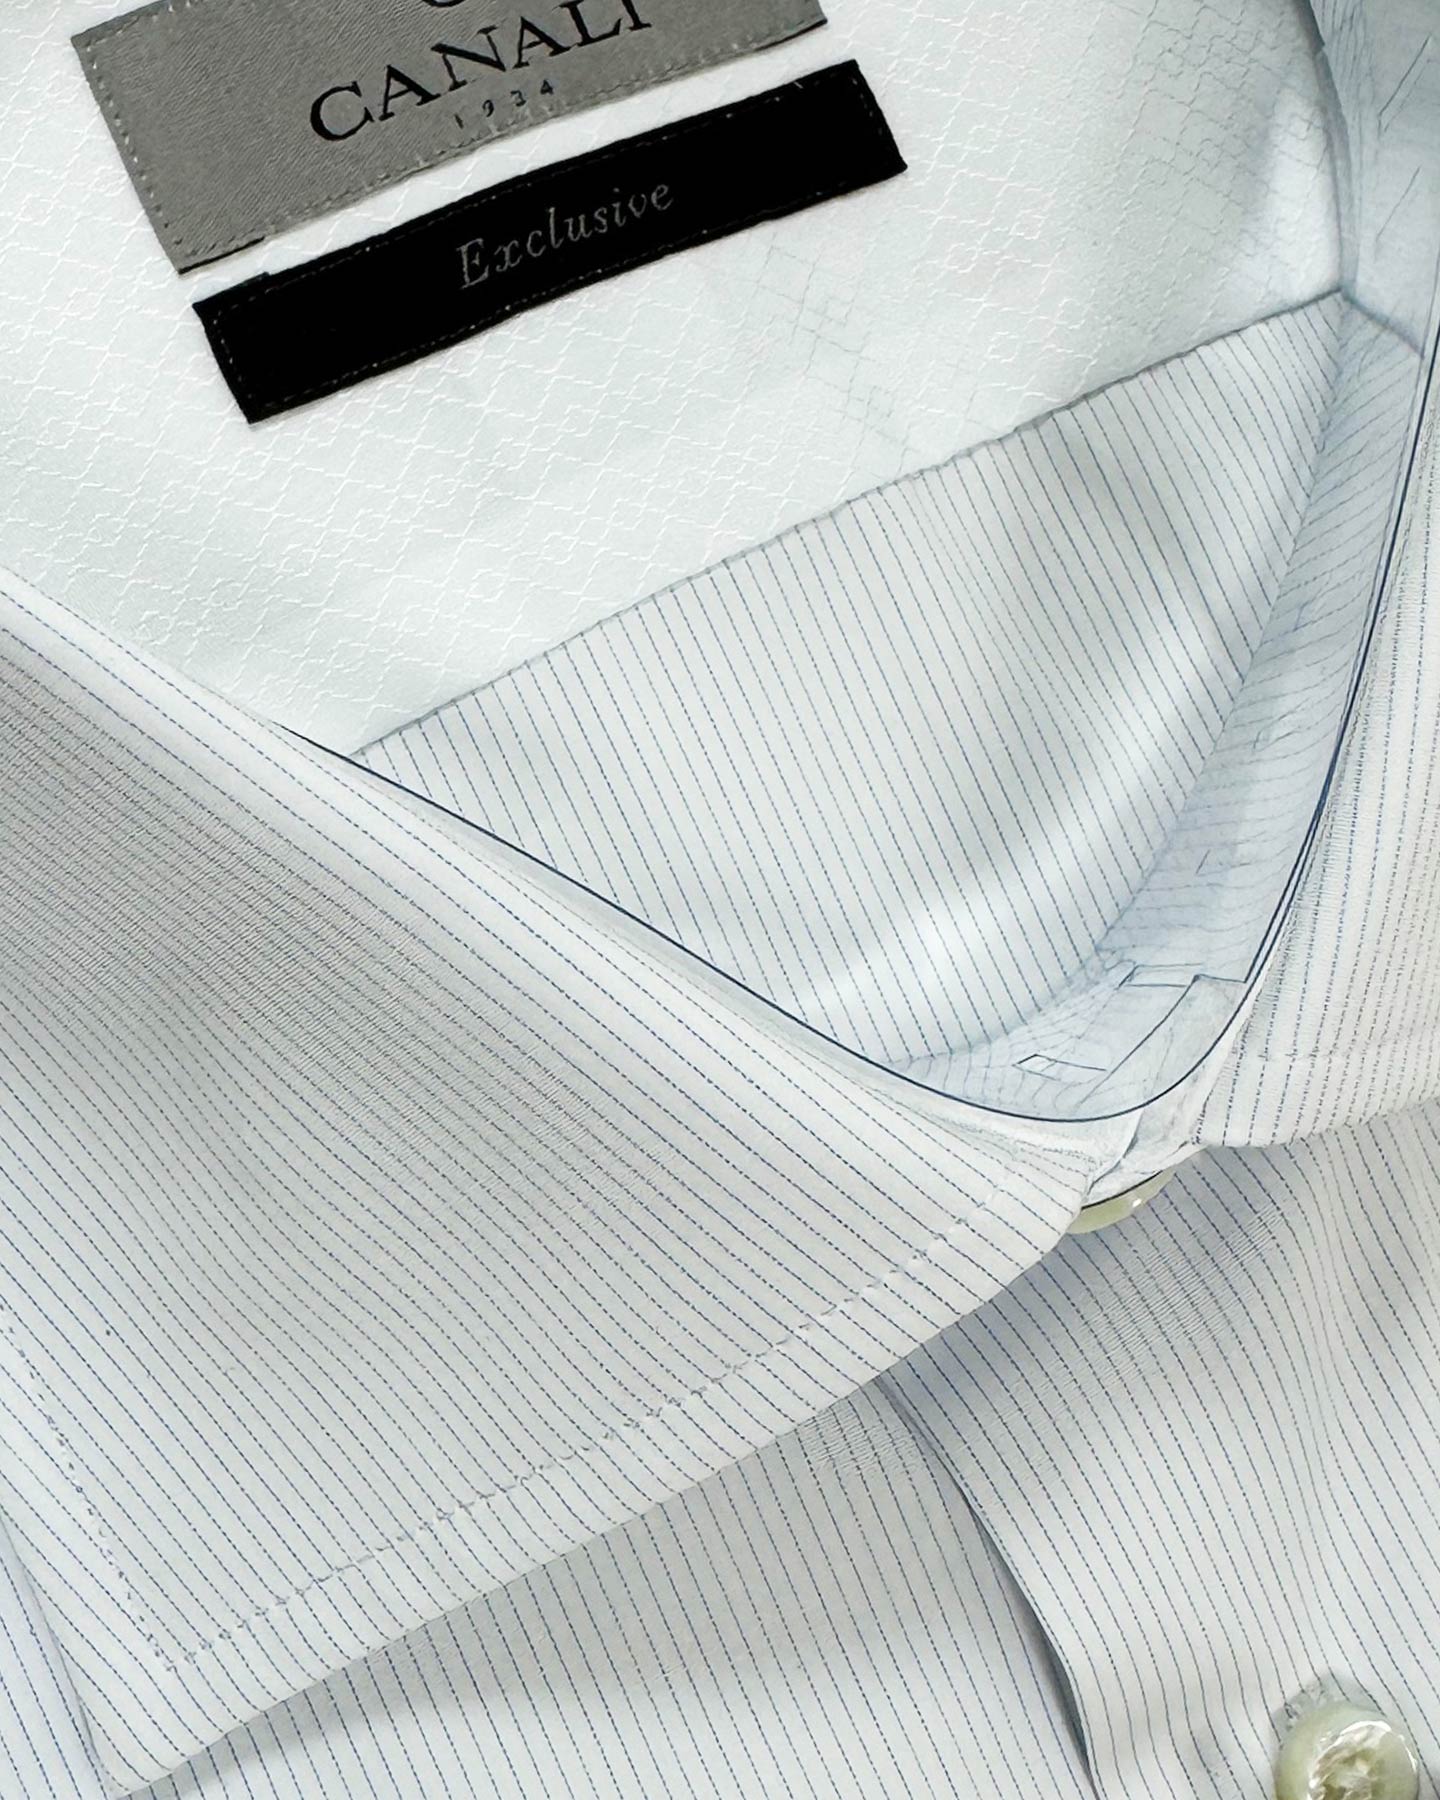 Canali Dress Shirt Micro Stripes Design - Exclusive Collection 41 - 16